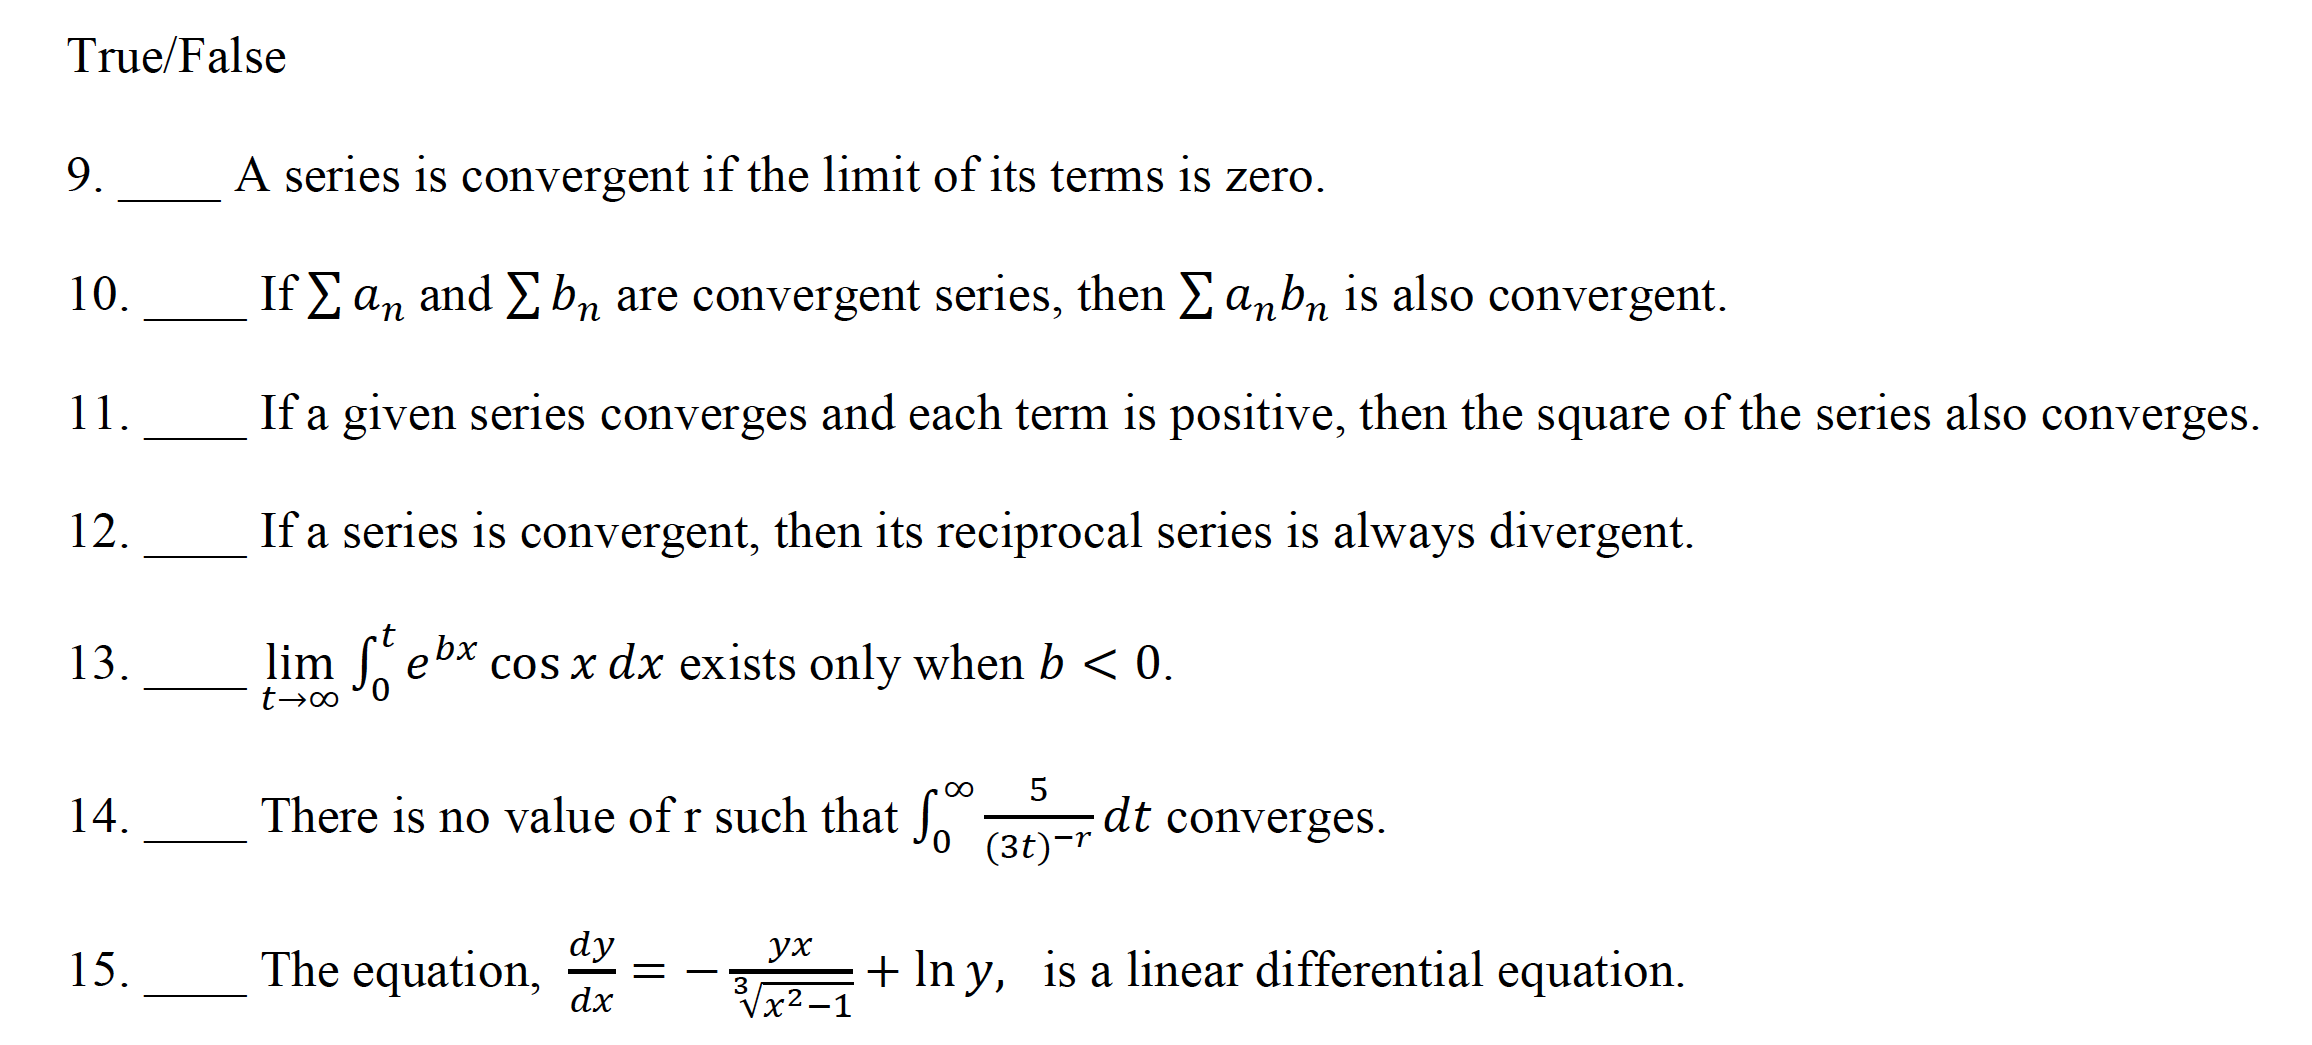 13.
ebx
cos x dx exists only when b < 0.
lim
t→∞
